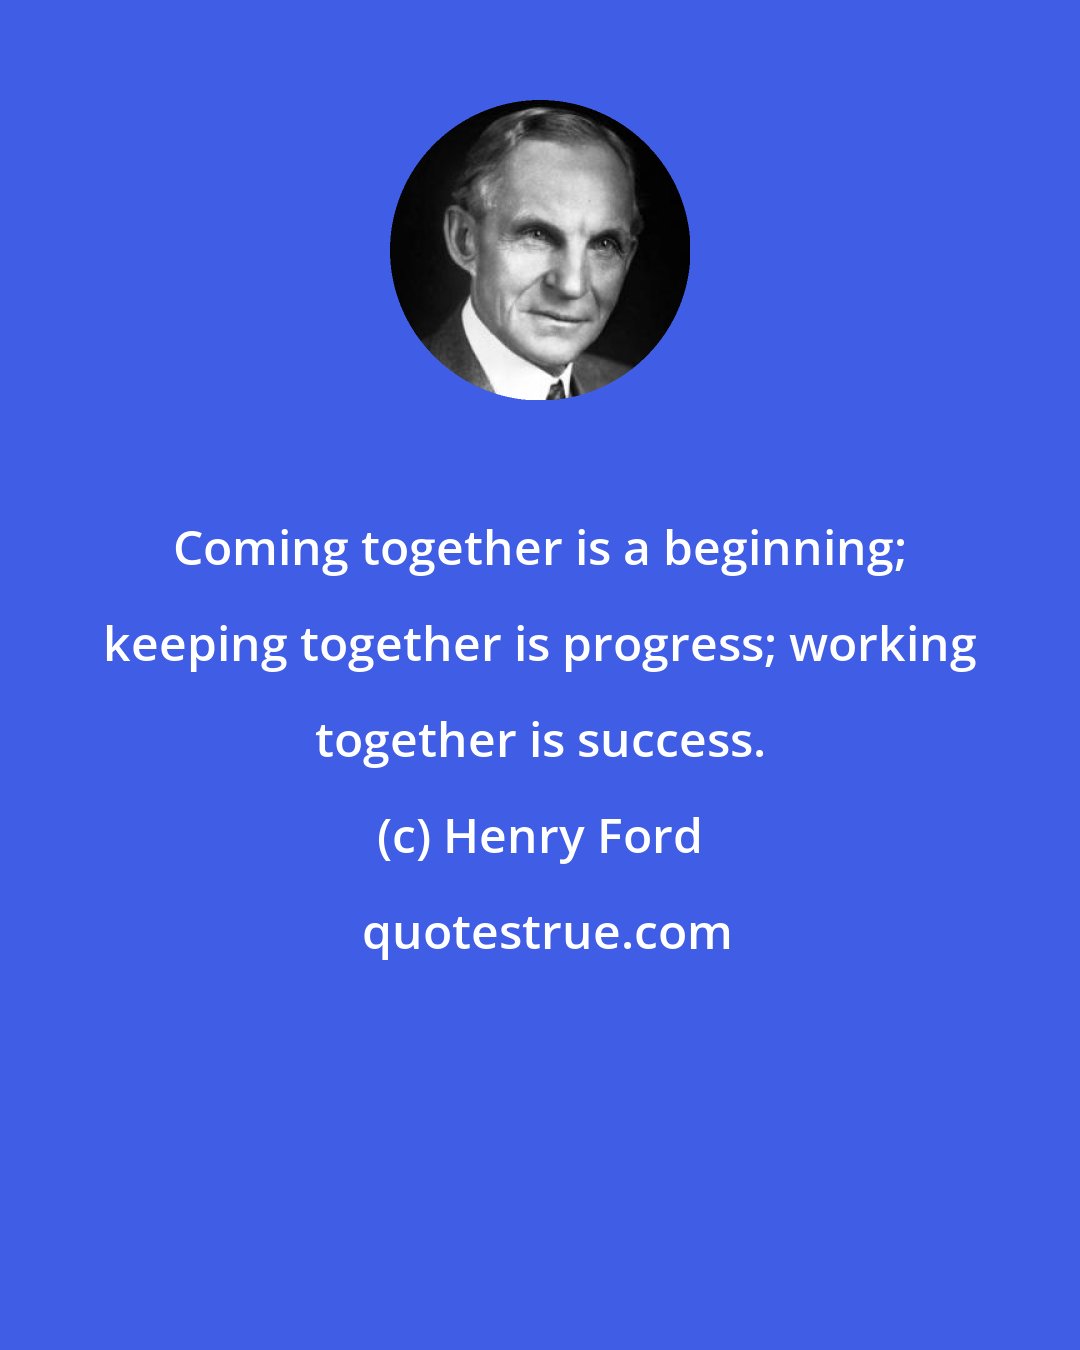 Henry Ford: Coming together is a beginning; keeping together is progress; working together is success.